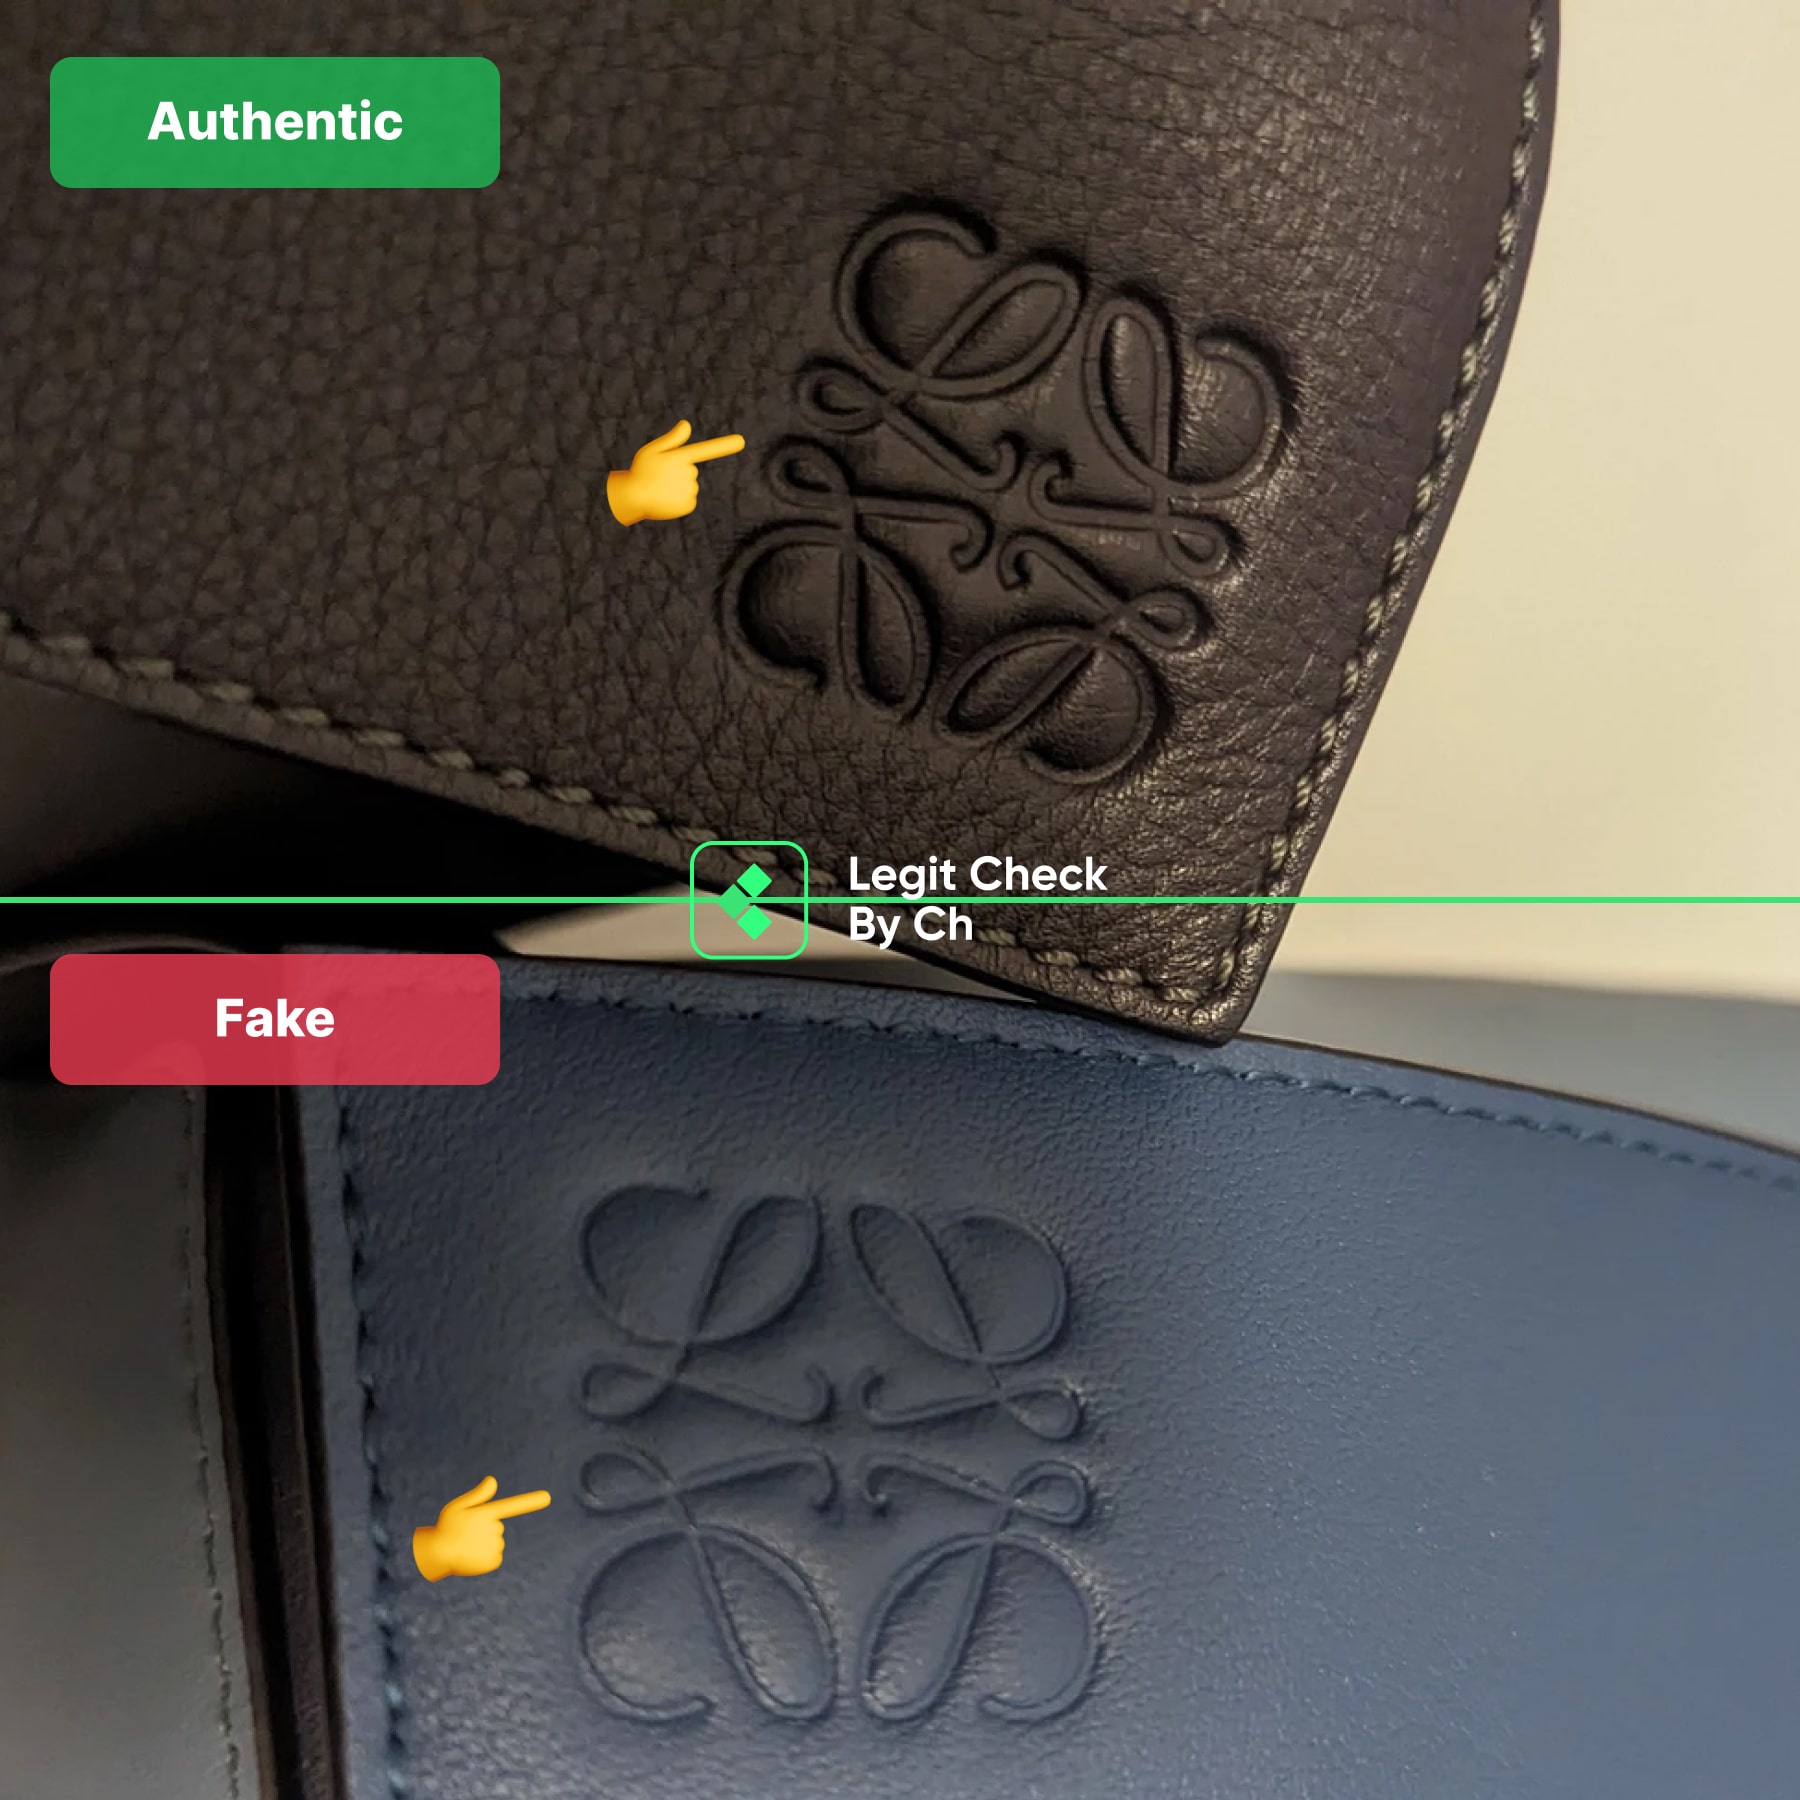 Loewe Archives - Legit Check By Ch